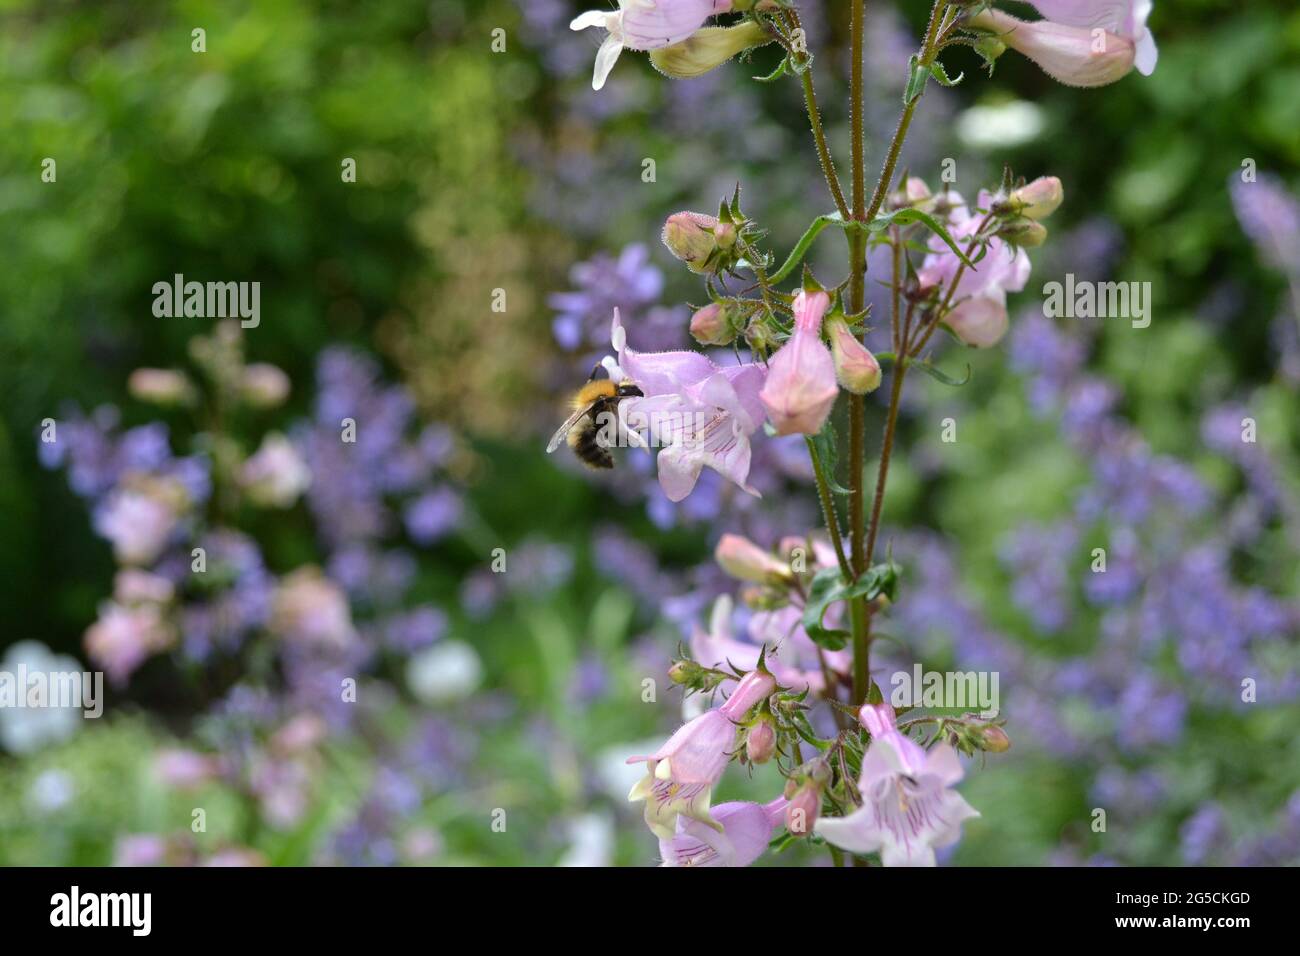 Penstemon digitalis 'Husker Red', penstemon 'Husker Red', in an English garden, visited by a bee. Stock Photo